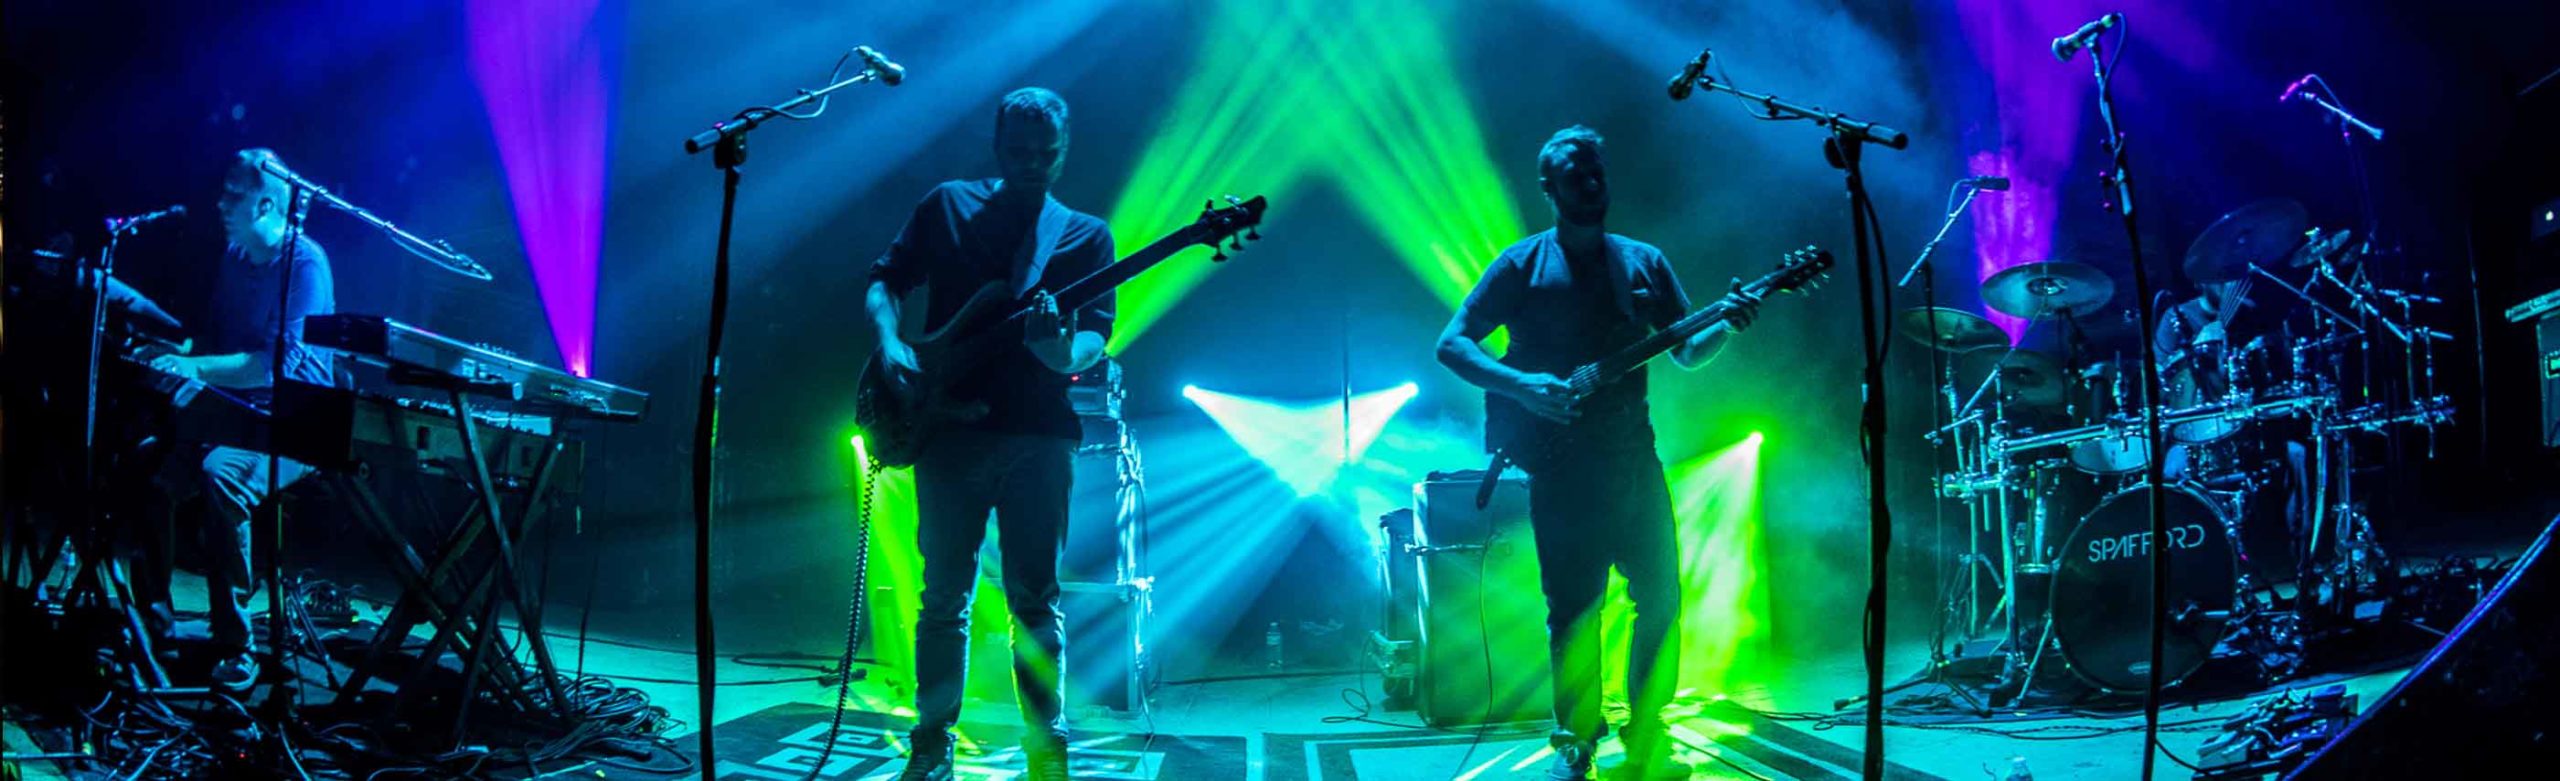 Listen Back: Spafford at the Top Hat in 2018 (Full Recording) Image